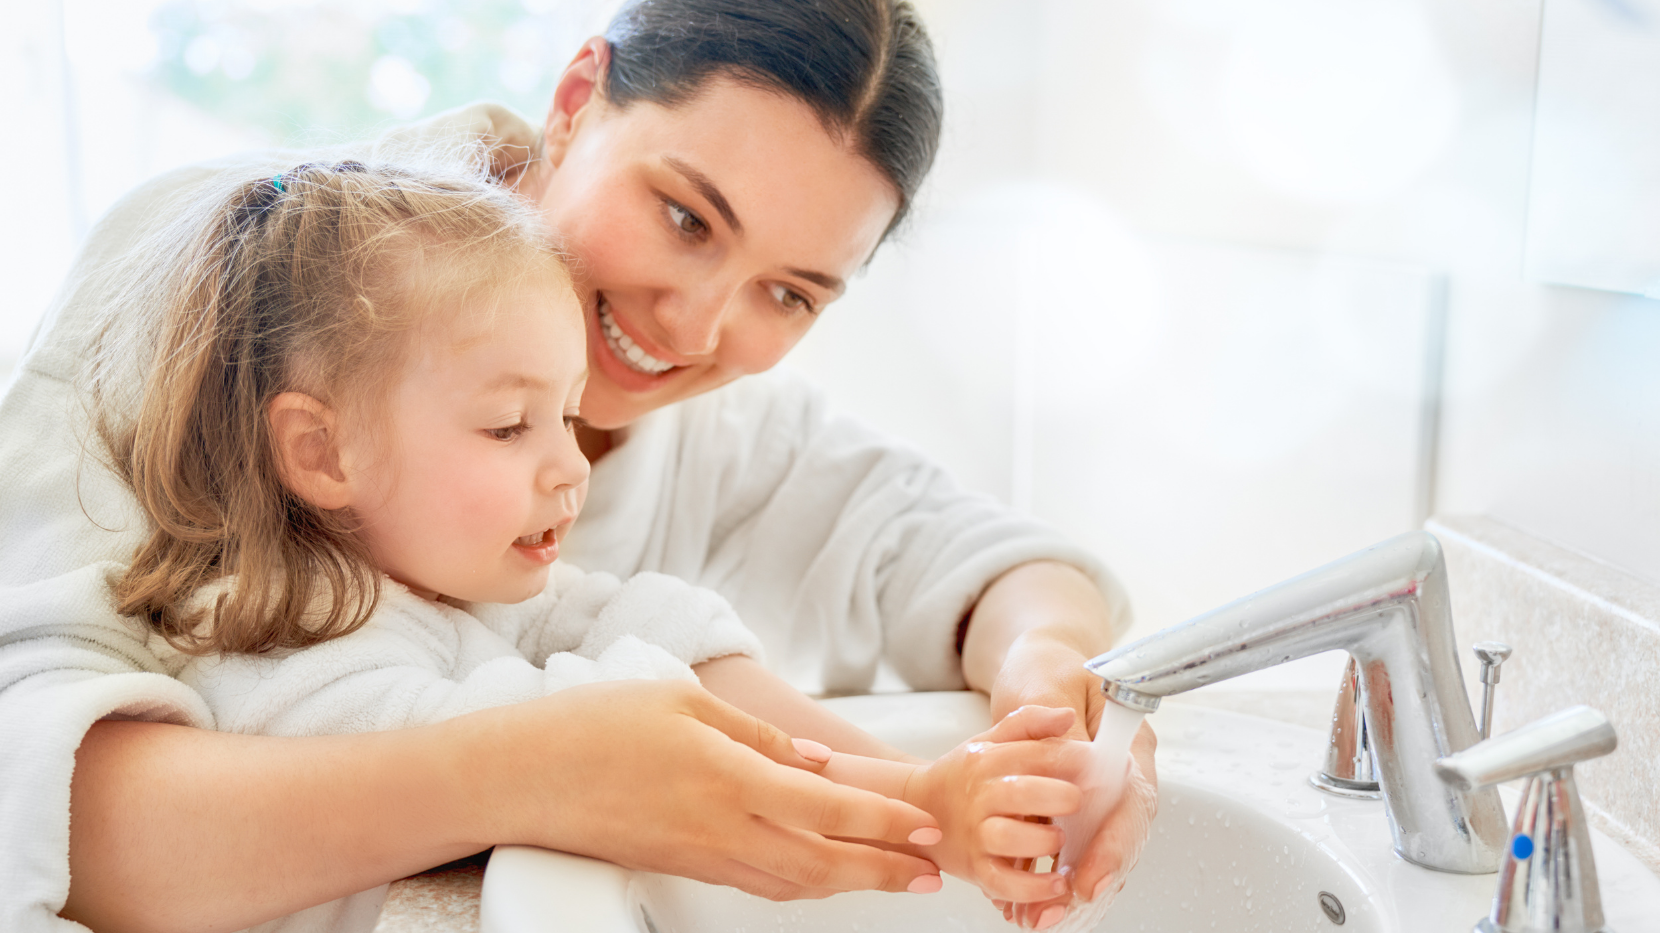 Mother and Daughter Washing their Hands